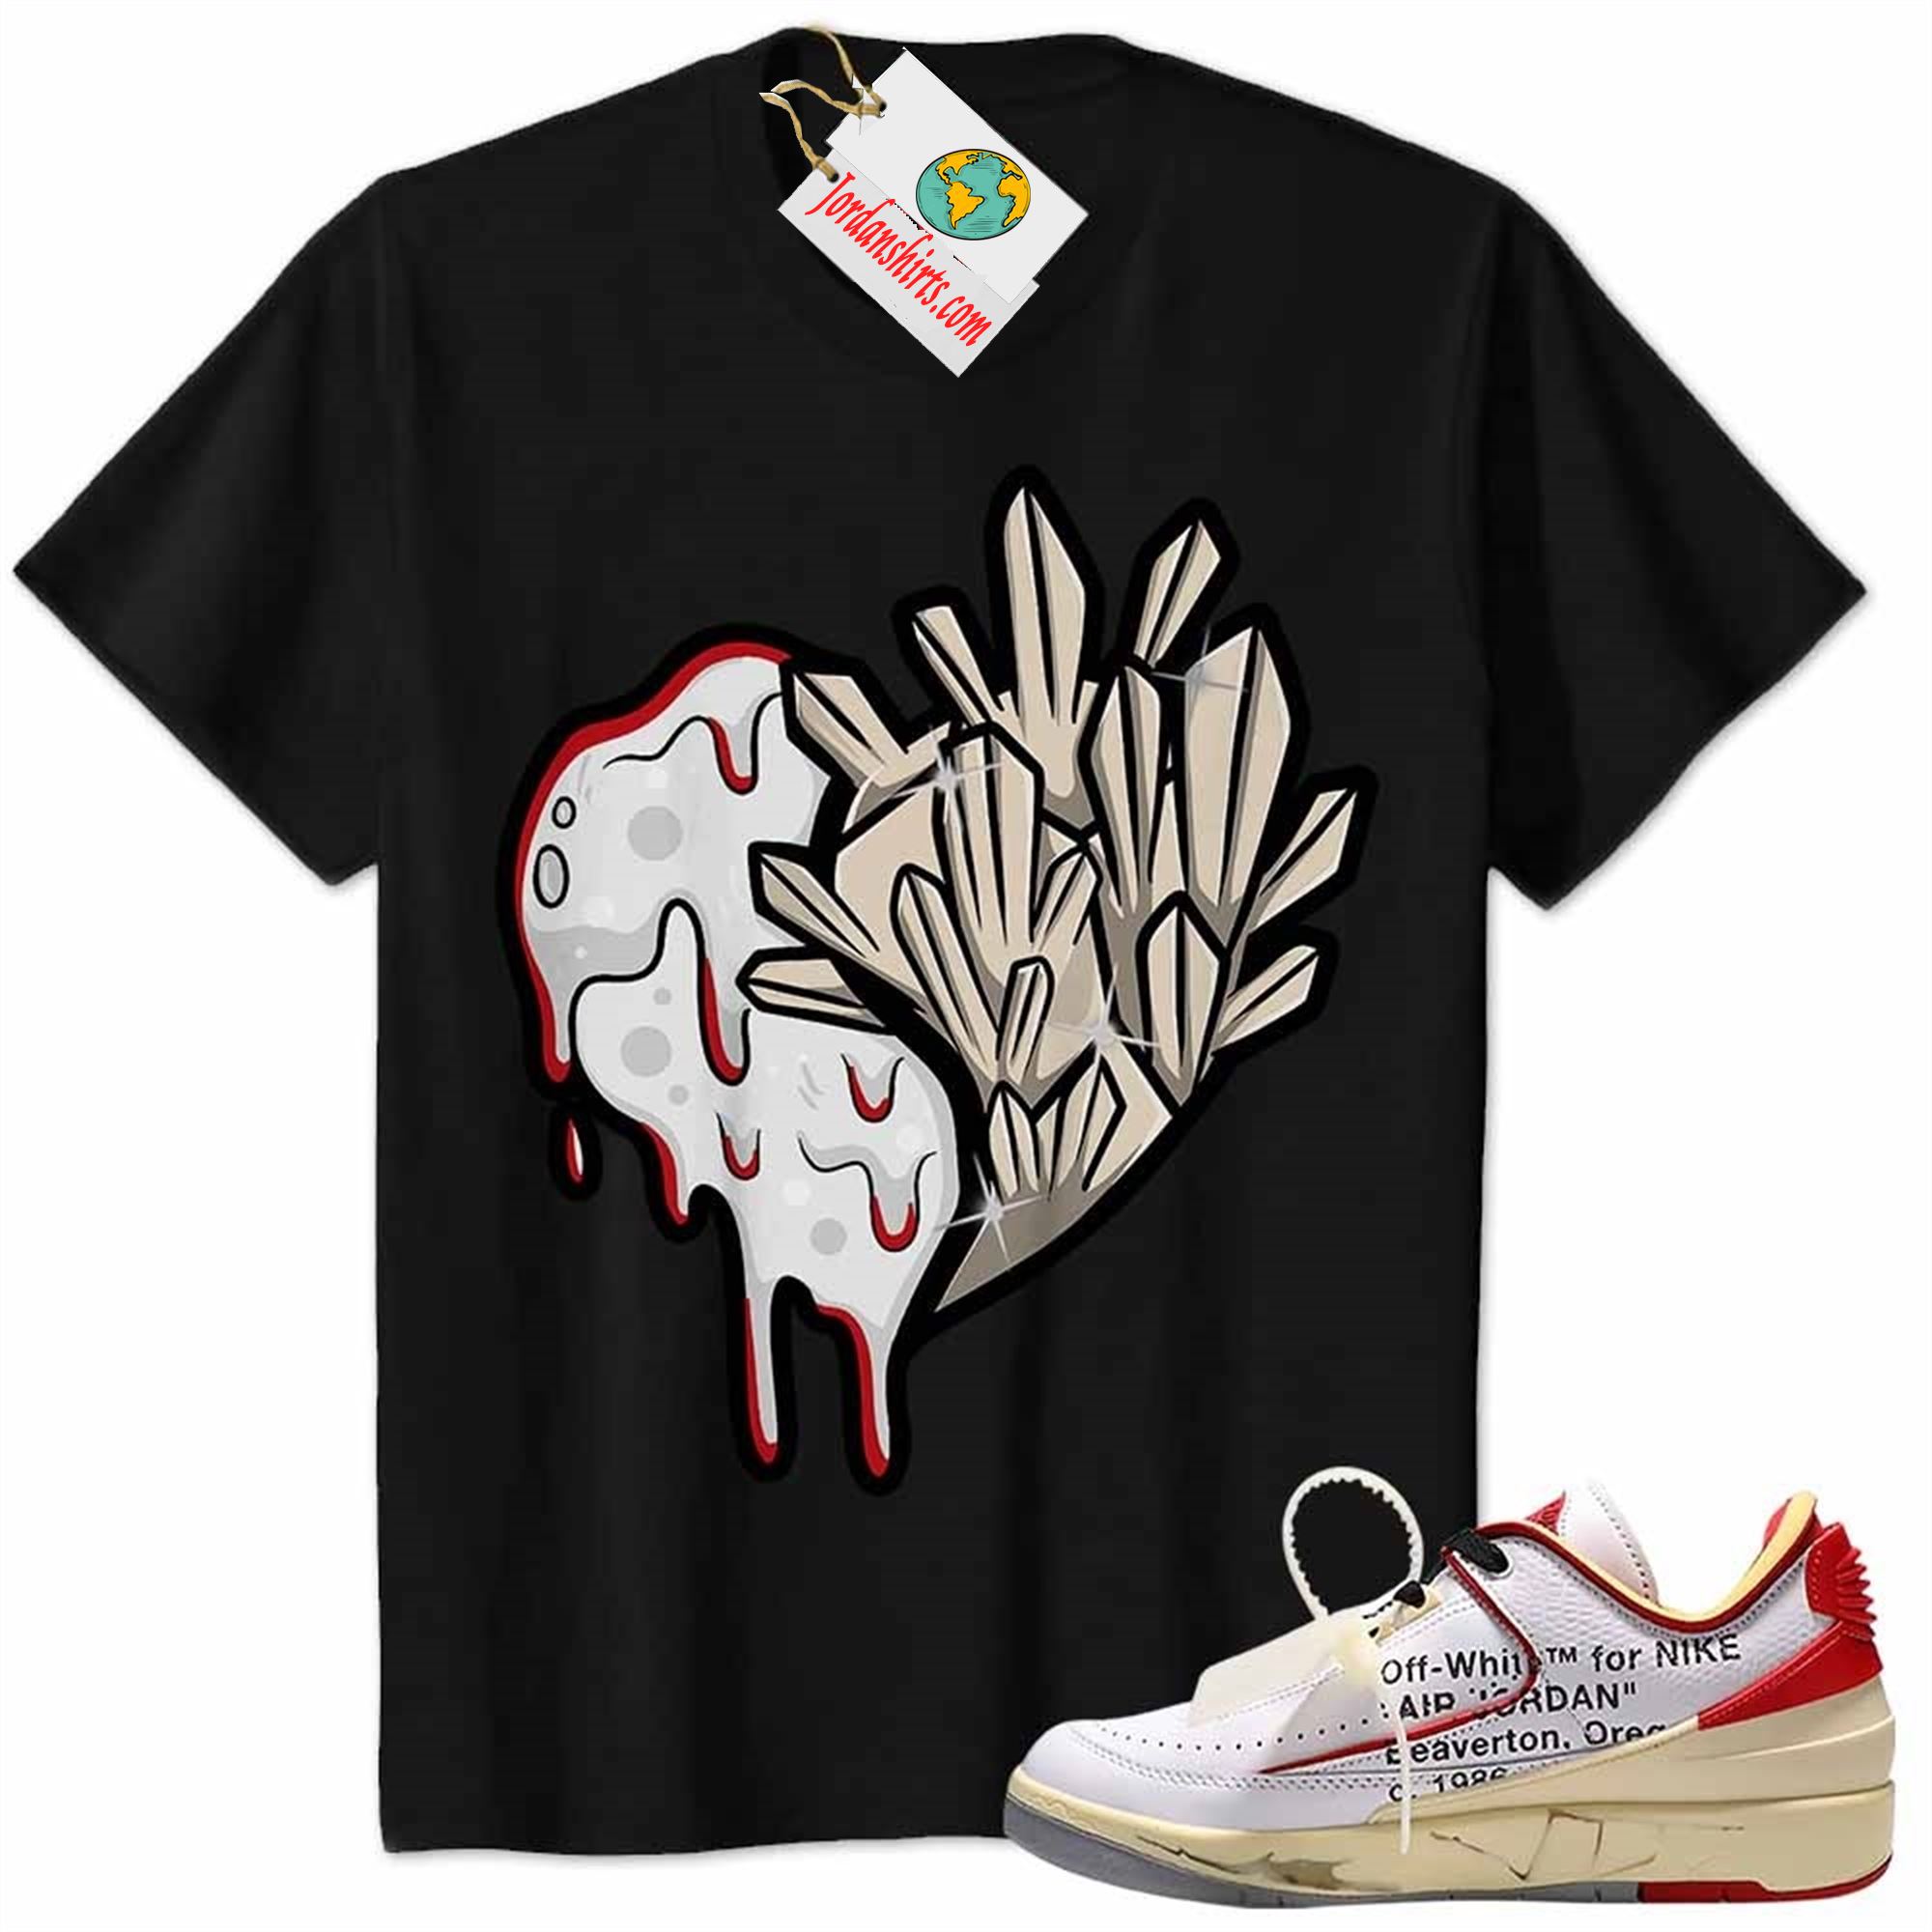 Jordan 2 Shirt, Crystal And Melt Heart Black Air Jordan 2 Low White Red Off-white 2s Size Up To 5xl